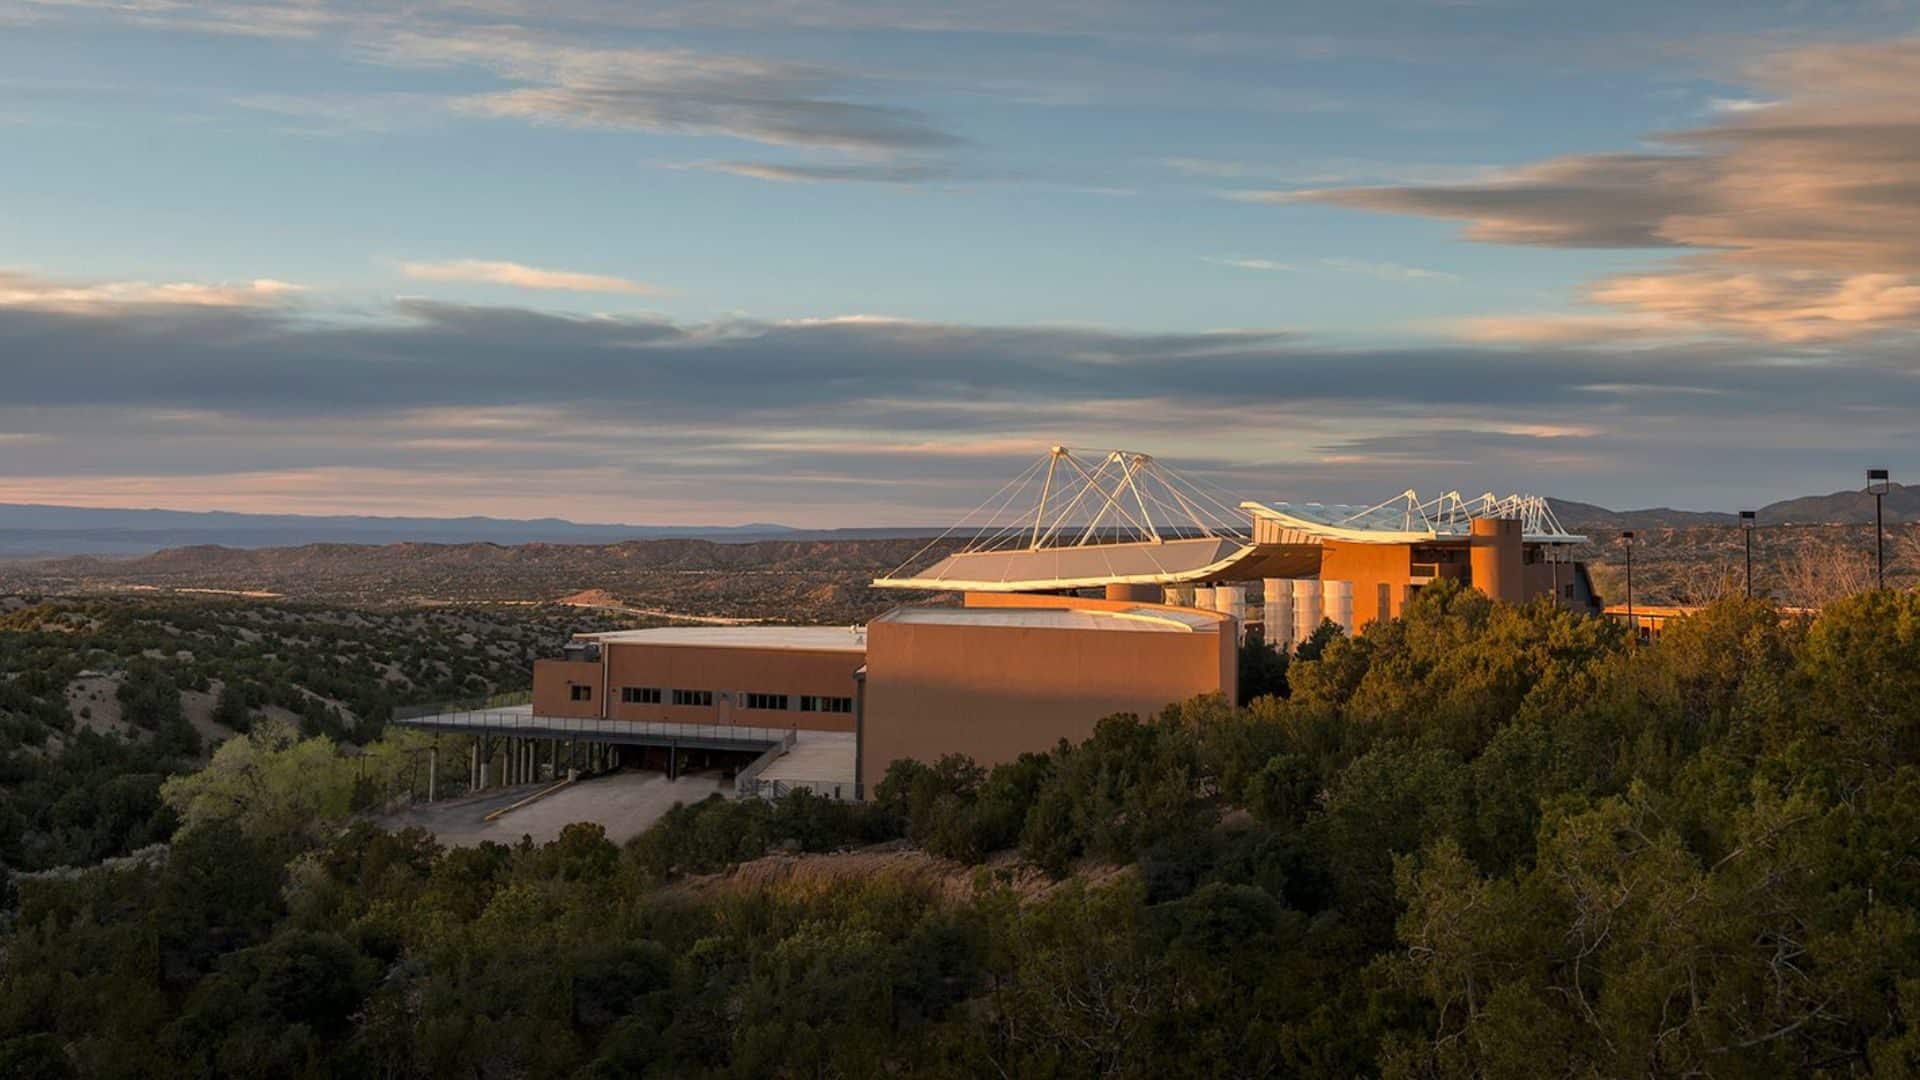 Aerial view of the Santa Fe Opera, an orange uniquely shaped building with white roof. Photo by Robert Godwin.